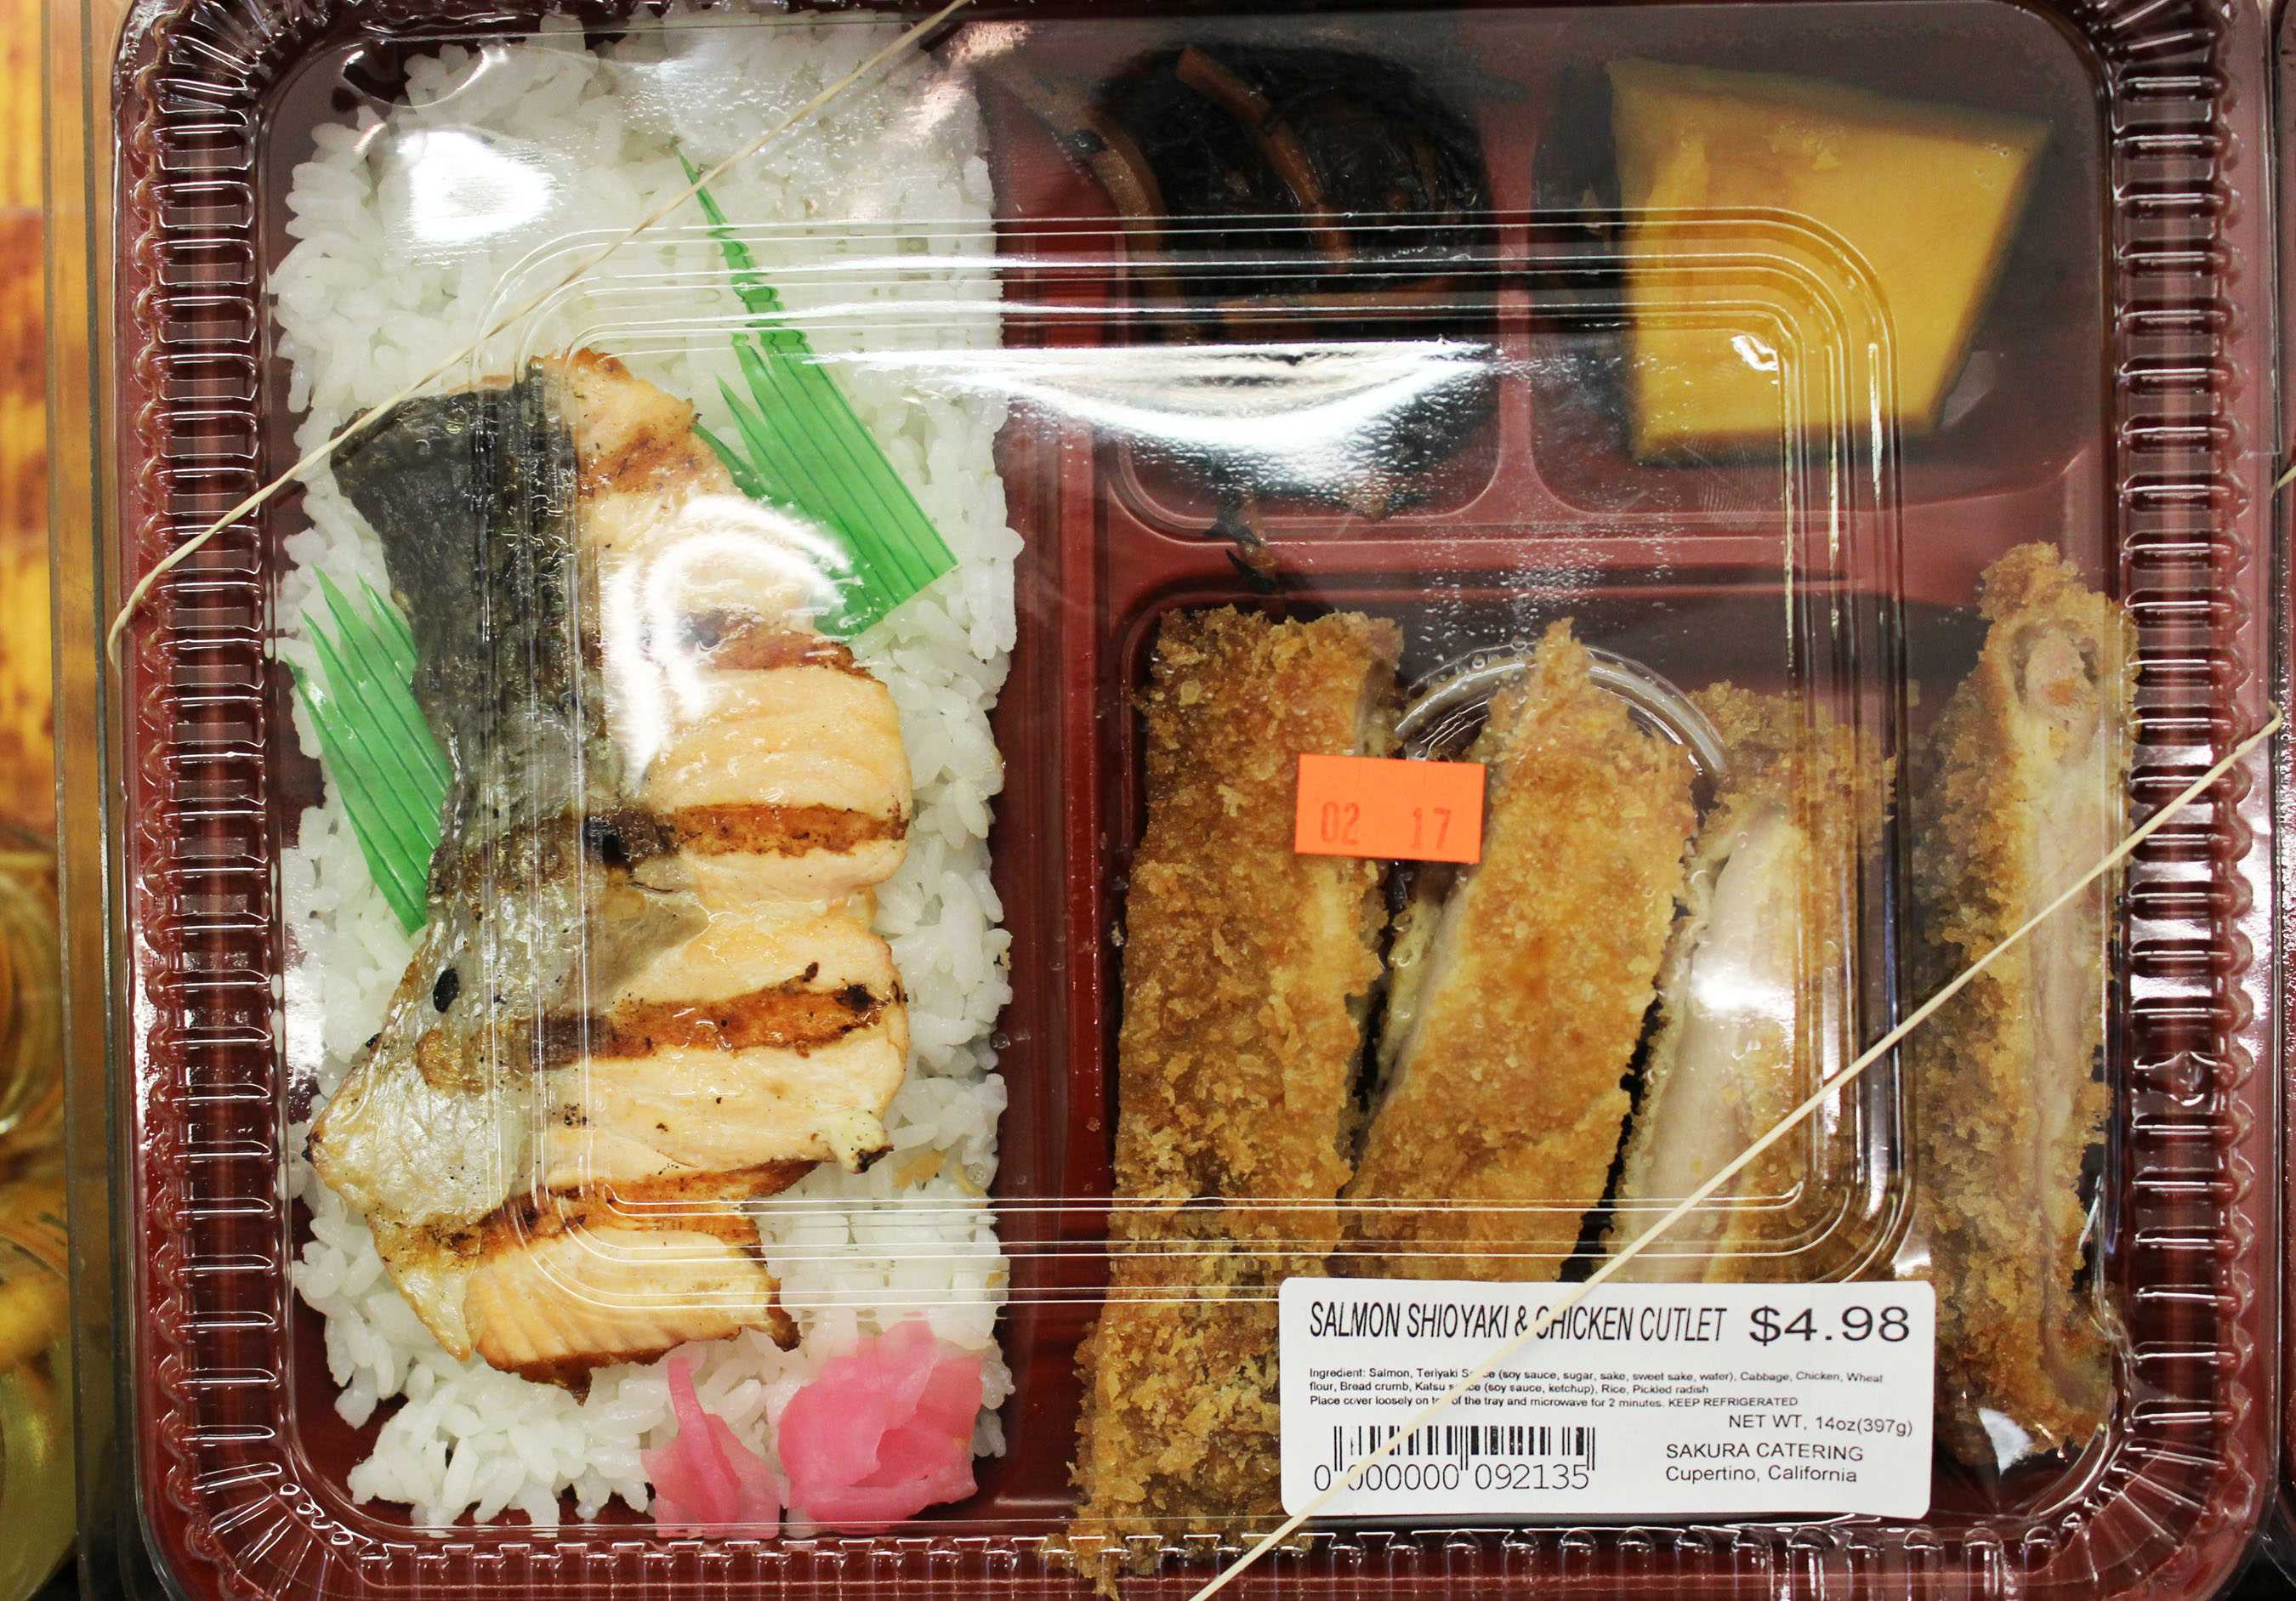 Marukai Market still sells bentos, like in Japan. Since Marukai follows the American rules of running a grocery store, they can’t have a kitchen to make fresh bentos, instead they sell ones made by factories. 